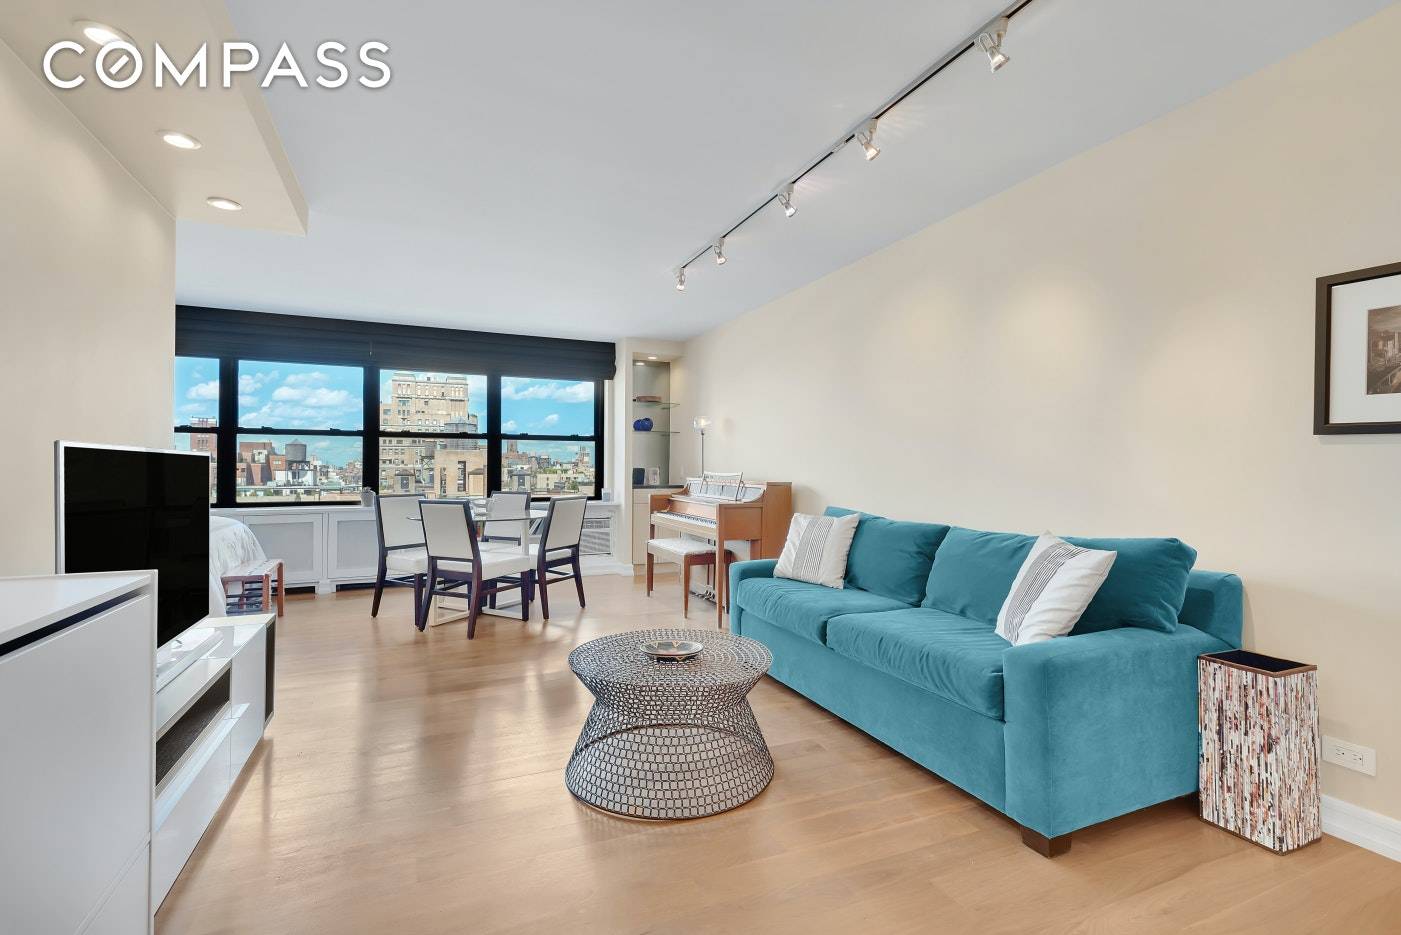 Spacious and open Alcove Studio with panoramic views, featuring the historic UWS rooftops and the Hudson River.